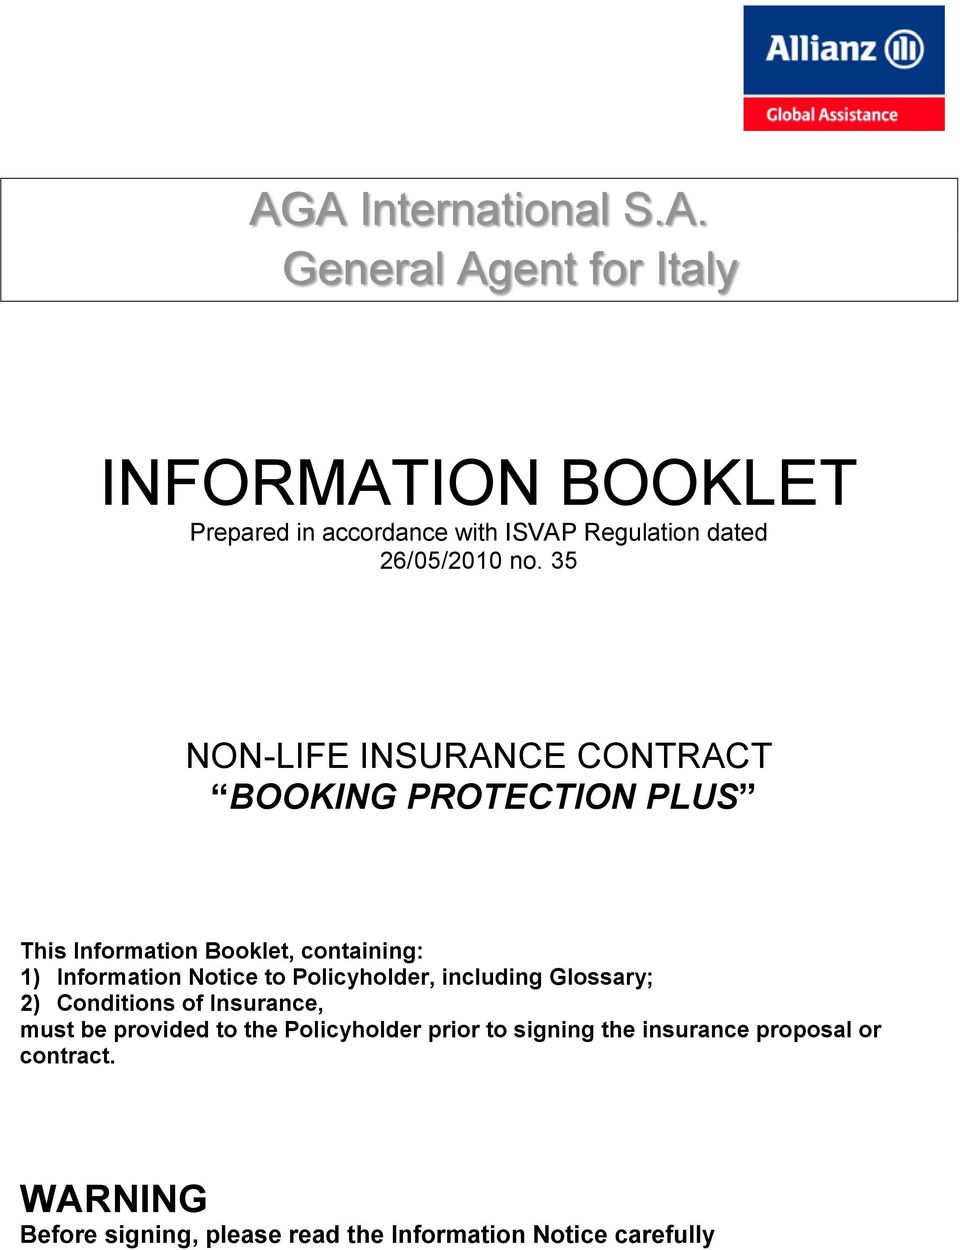 Policyholder, including Glossary; 2) Conditions of Insurance, must be provided to the Policyholder prior to signing